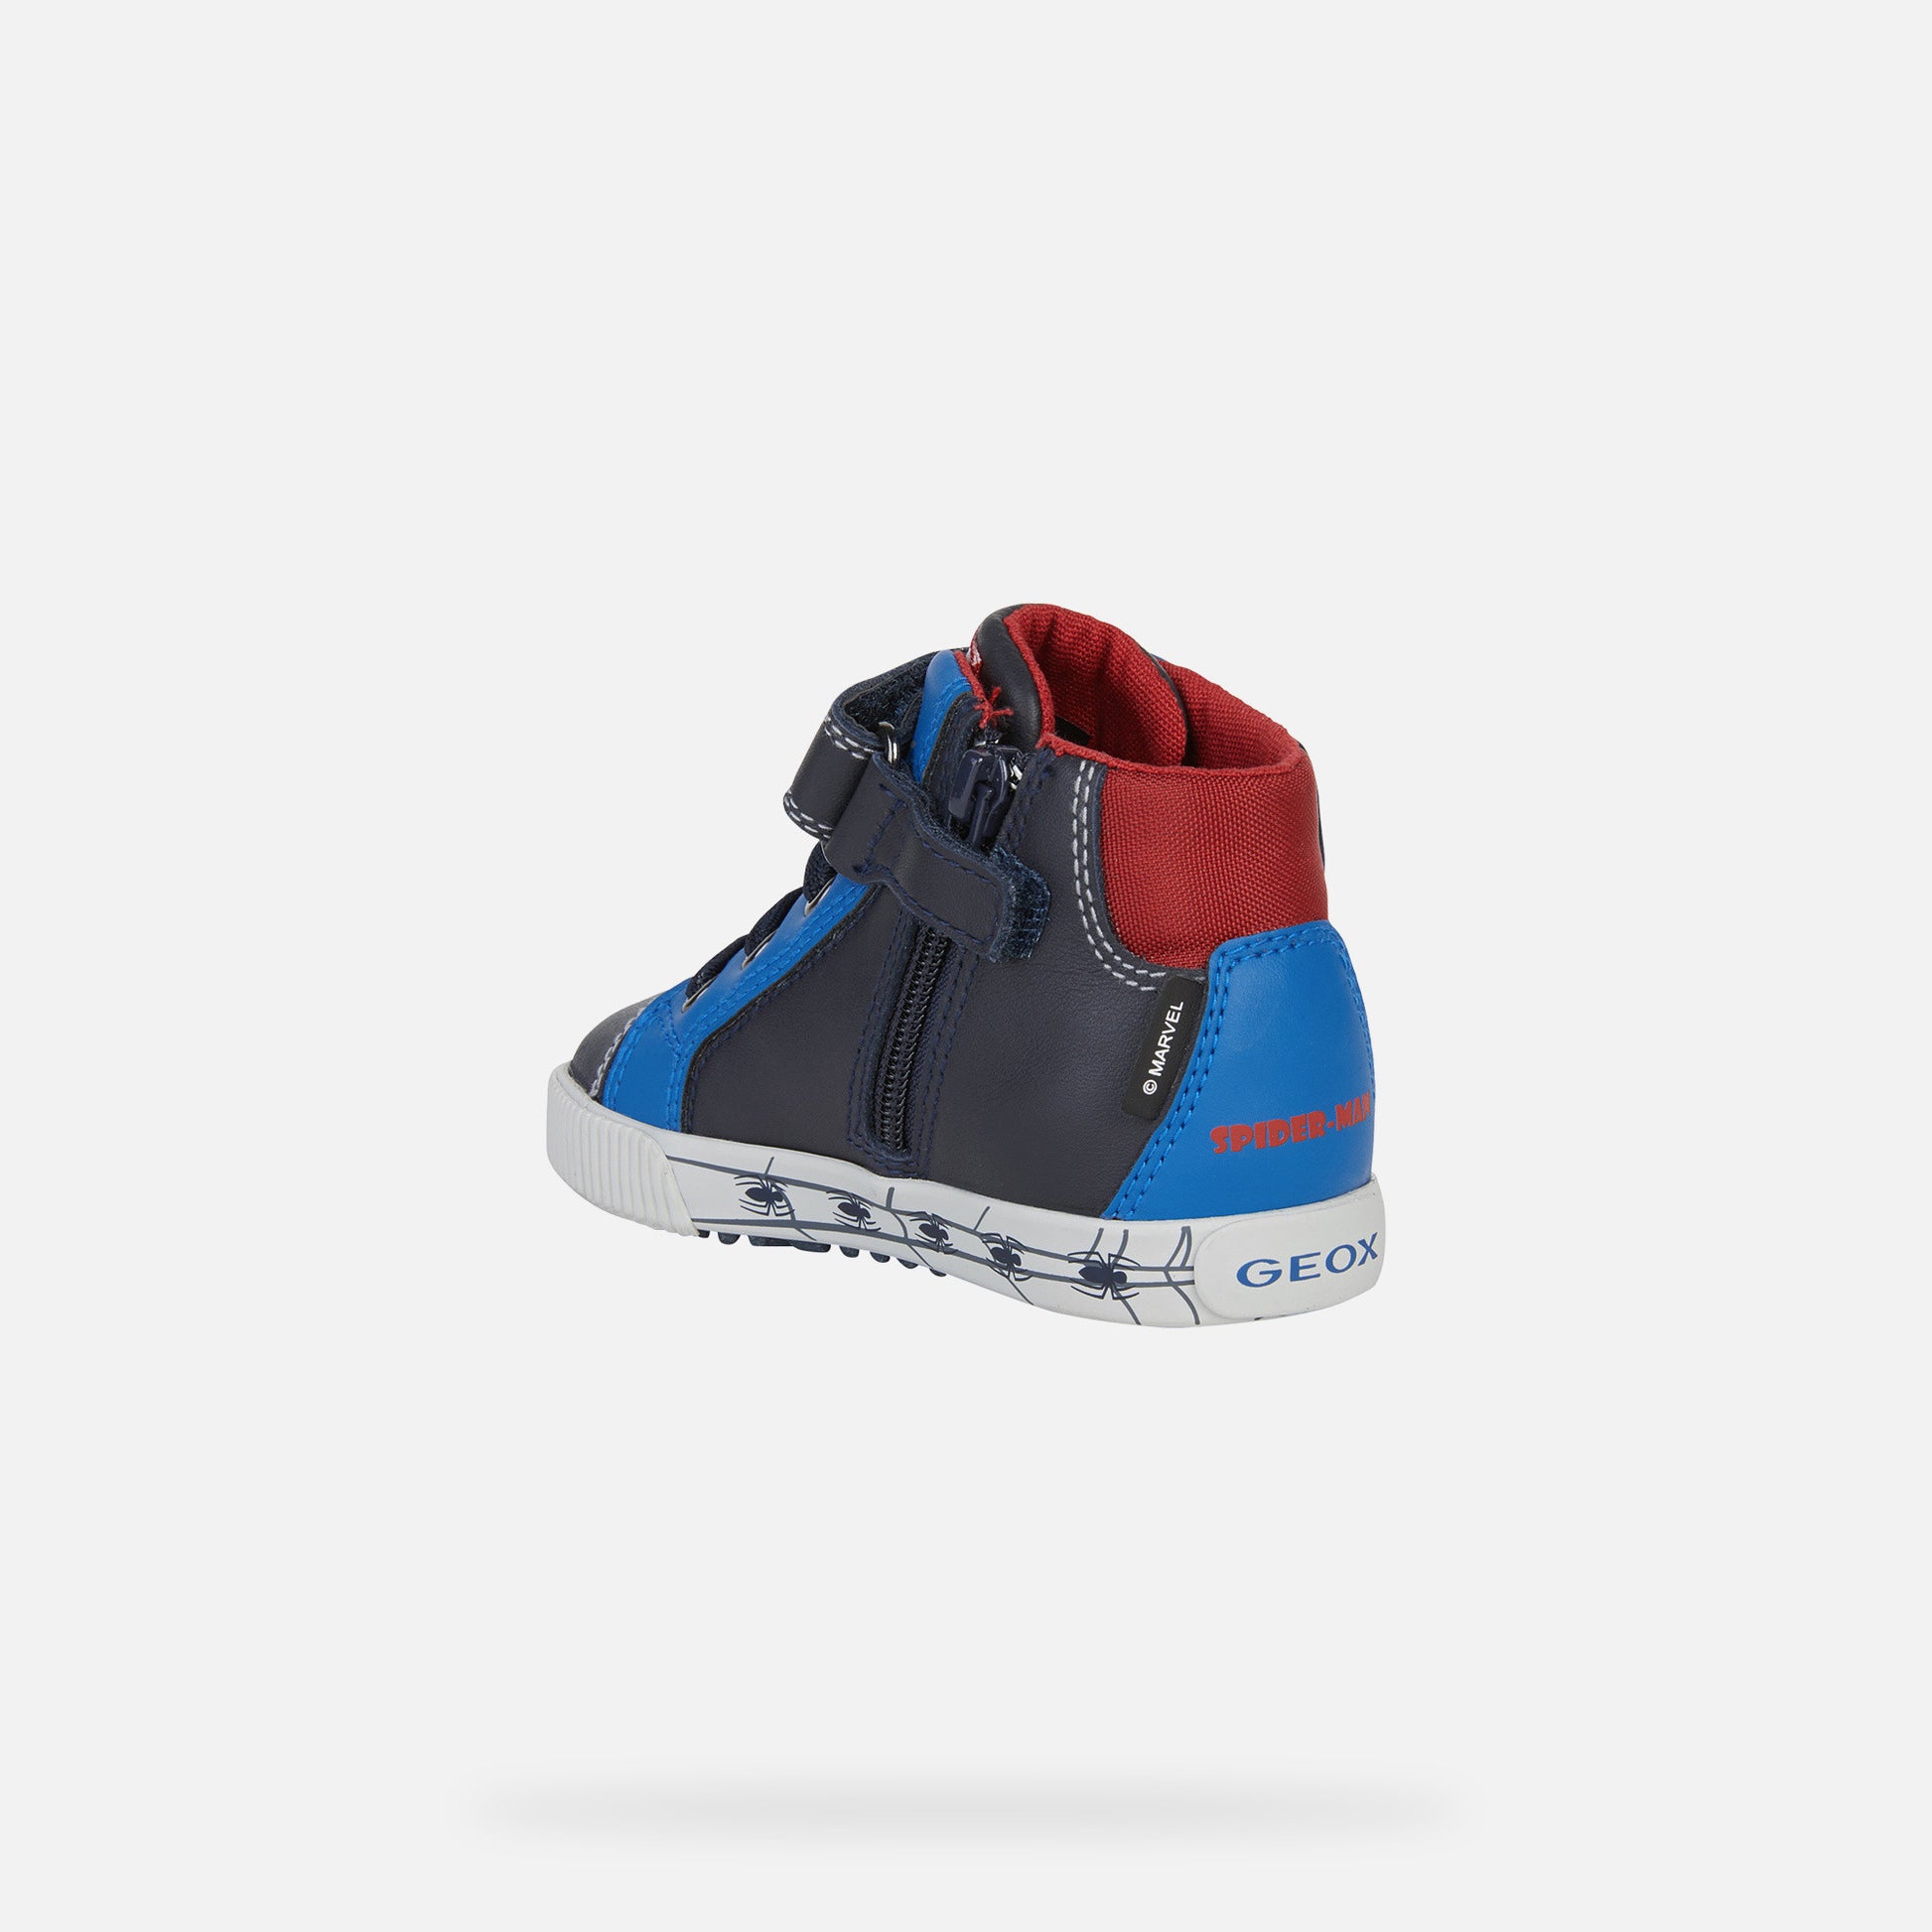 A boys Hi-Top trainer by Geox, style B Kilwi Boy Spiderman, in navy and royal with red cuff, inside zip and velcro fastening. Back view.